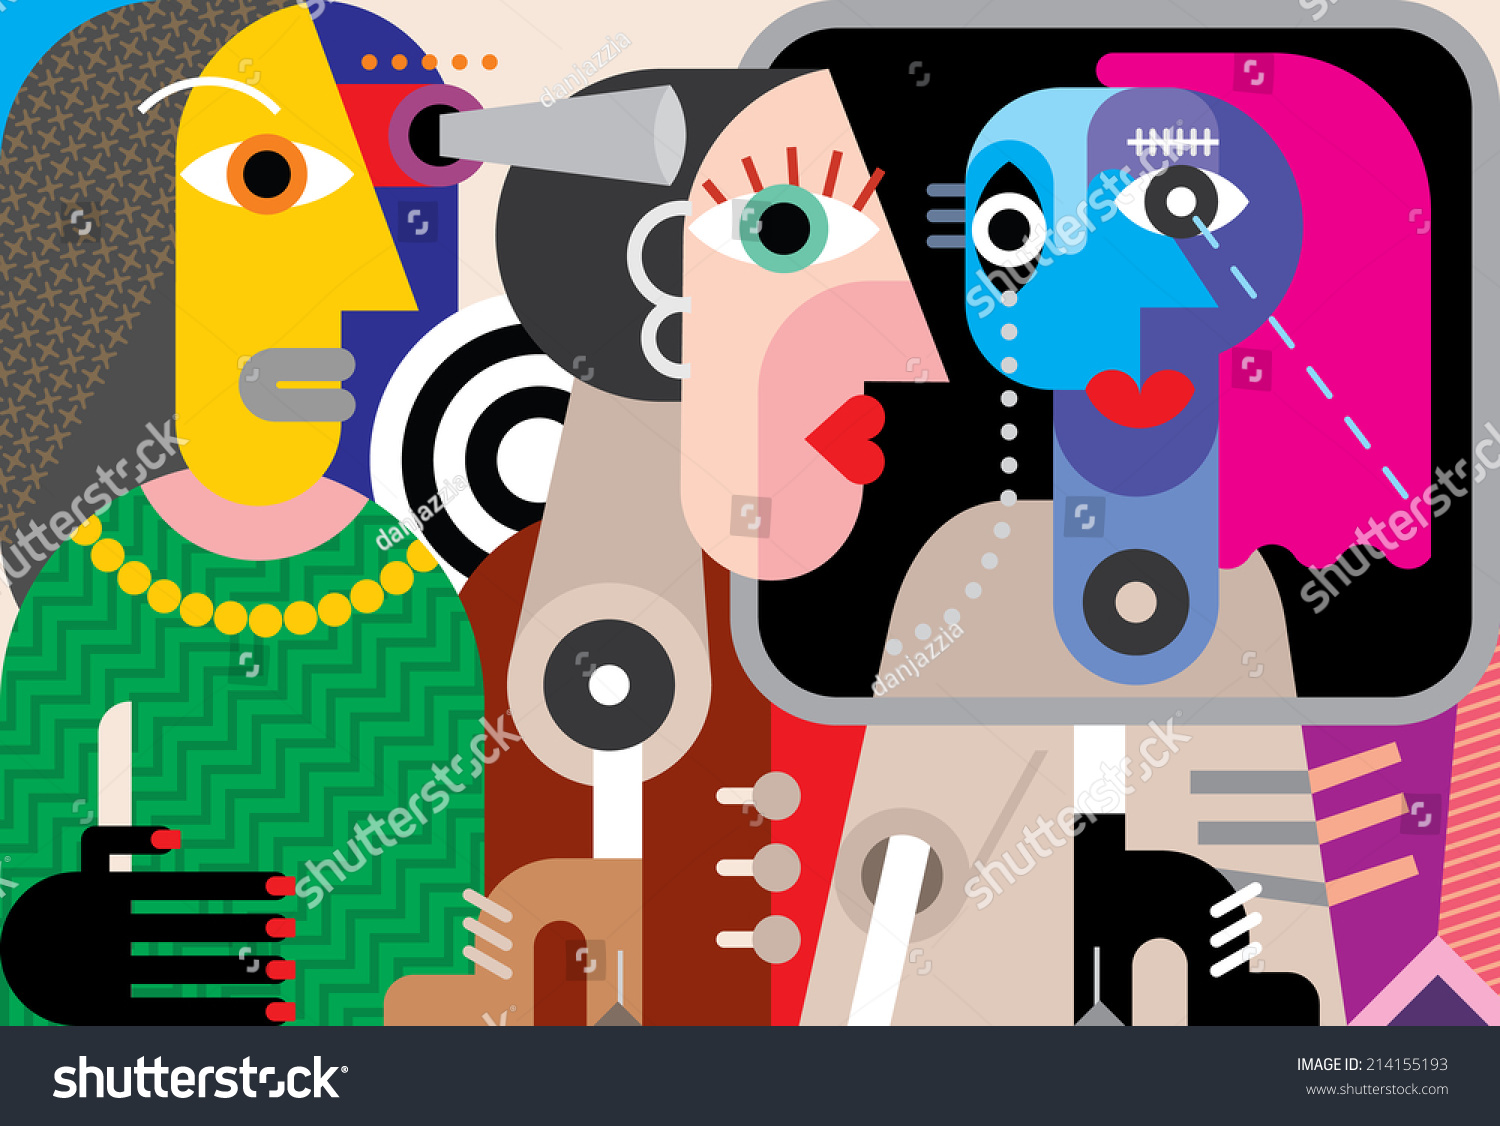 Group Of Strange People - Abstract Art Vector Illustration. - 214155193 ...